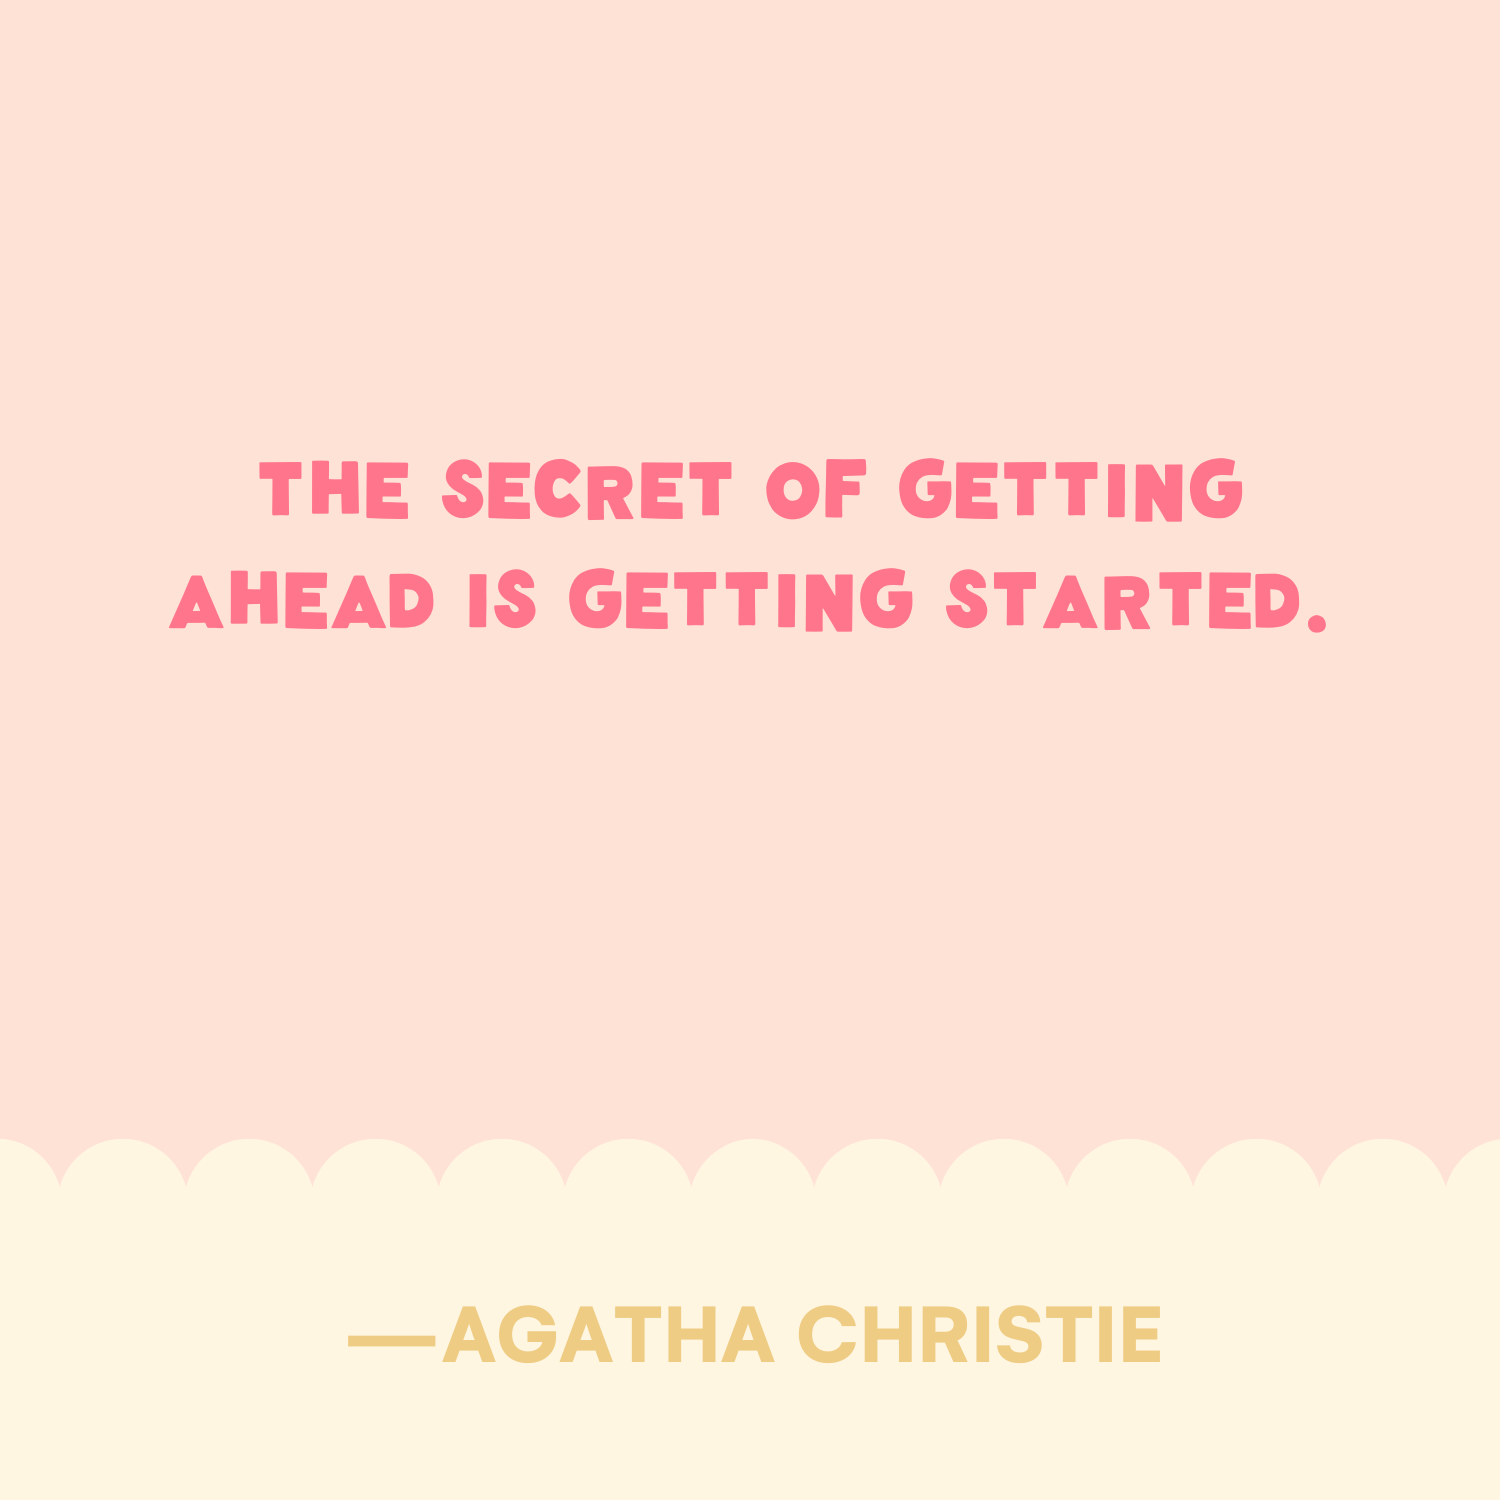 <p>"The secret of getting ahead is getting started." —Agatha Christie </p>